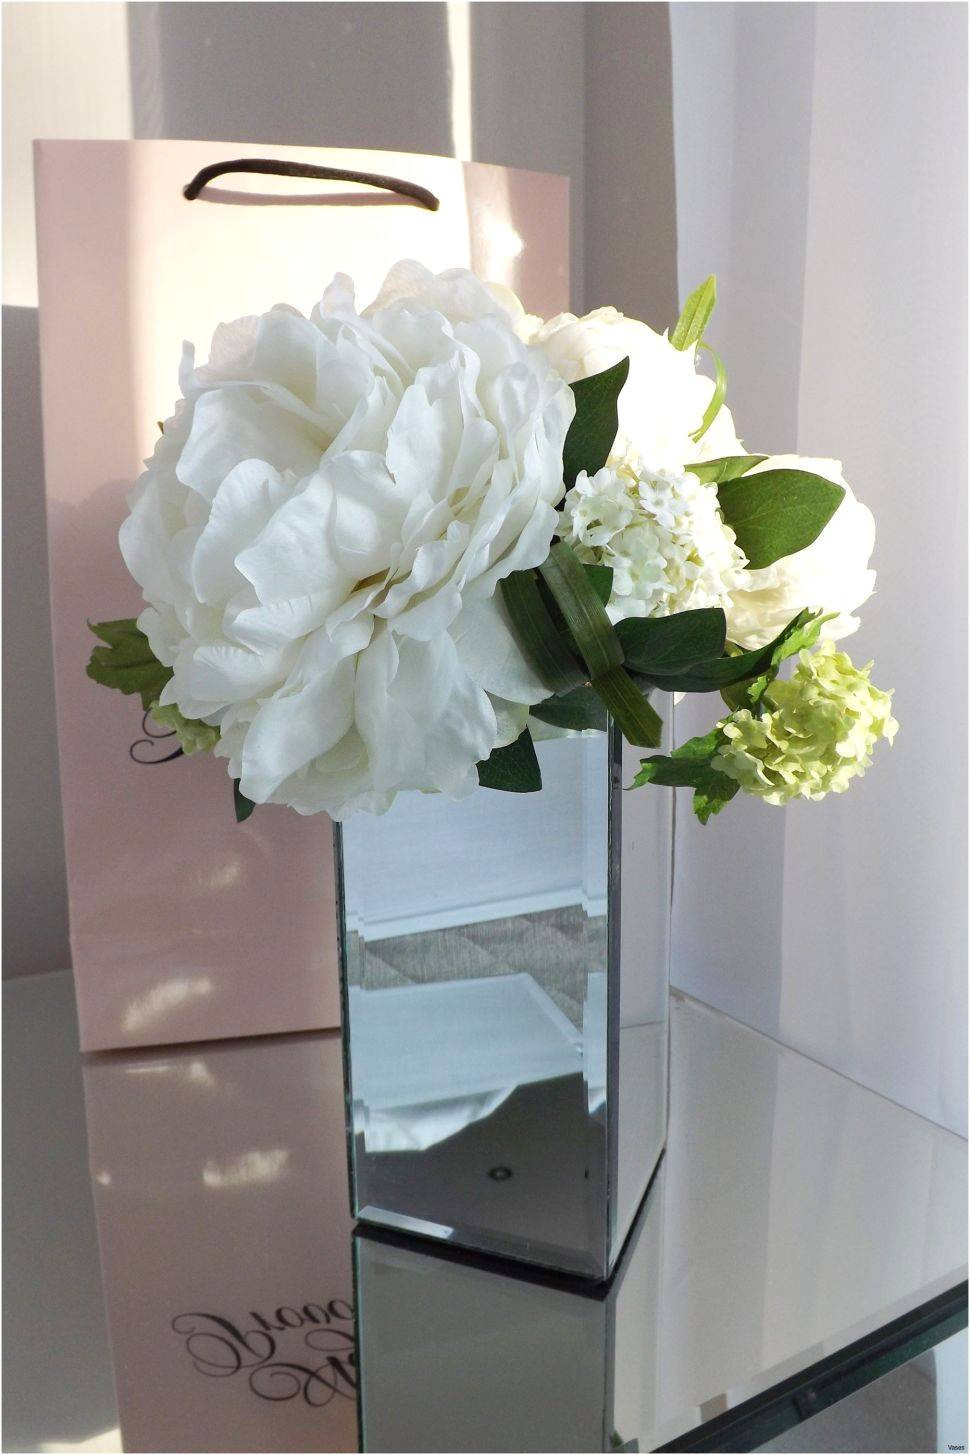 24 Perfect White Hydrangea In Glass Vase 2024 free download white hydrangea in glass vase of hydrangeas centerpieces for weddings luxury silk flowers metal vases in hydrangeas centerpieces for weddings luxury silk flowers metal vases 3h mirrored mosa